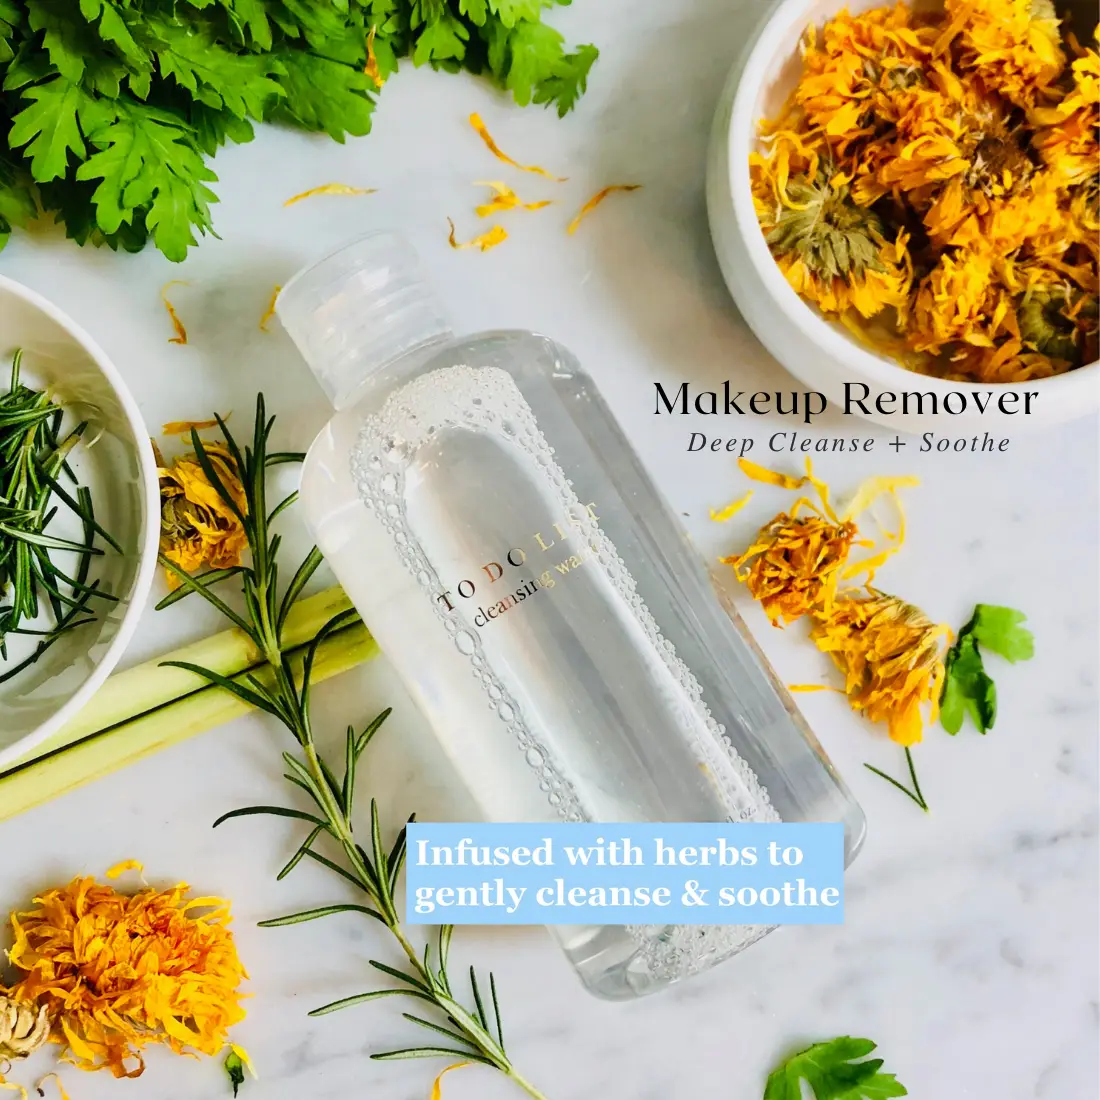 Micellar Cleansing Water - Makeup Remover infused